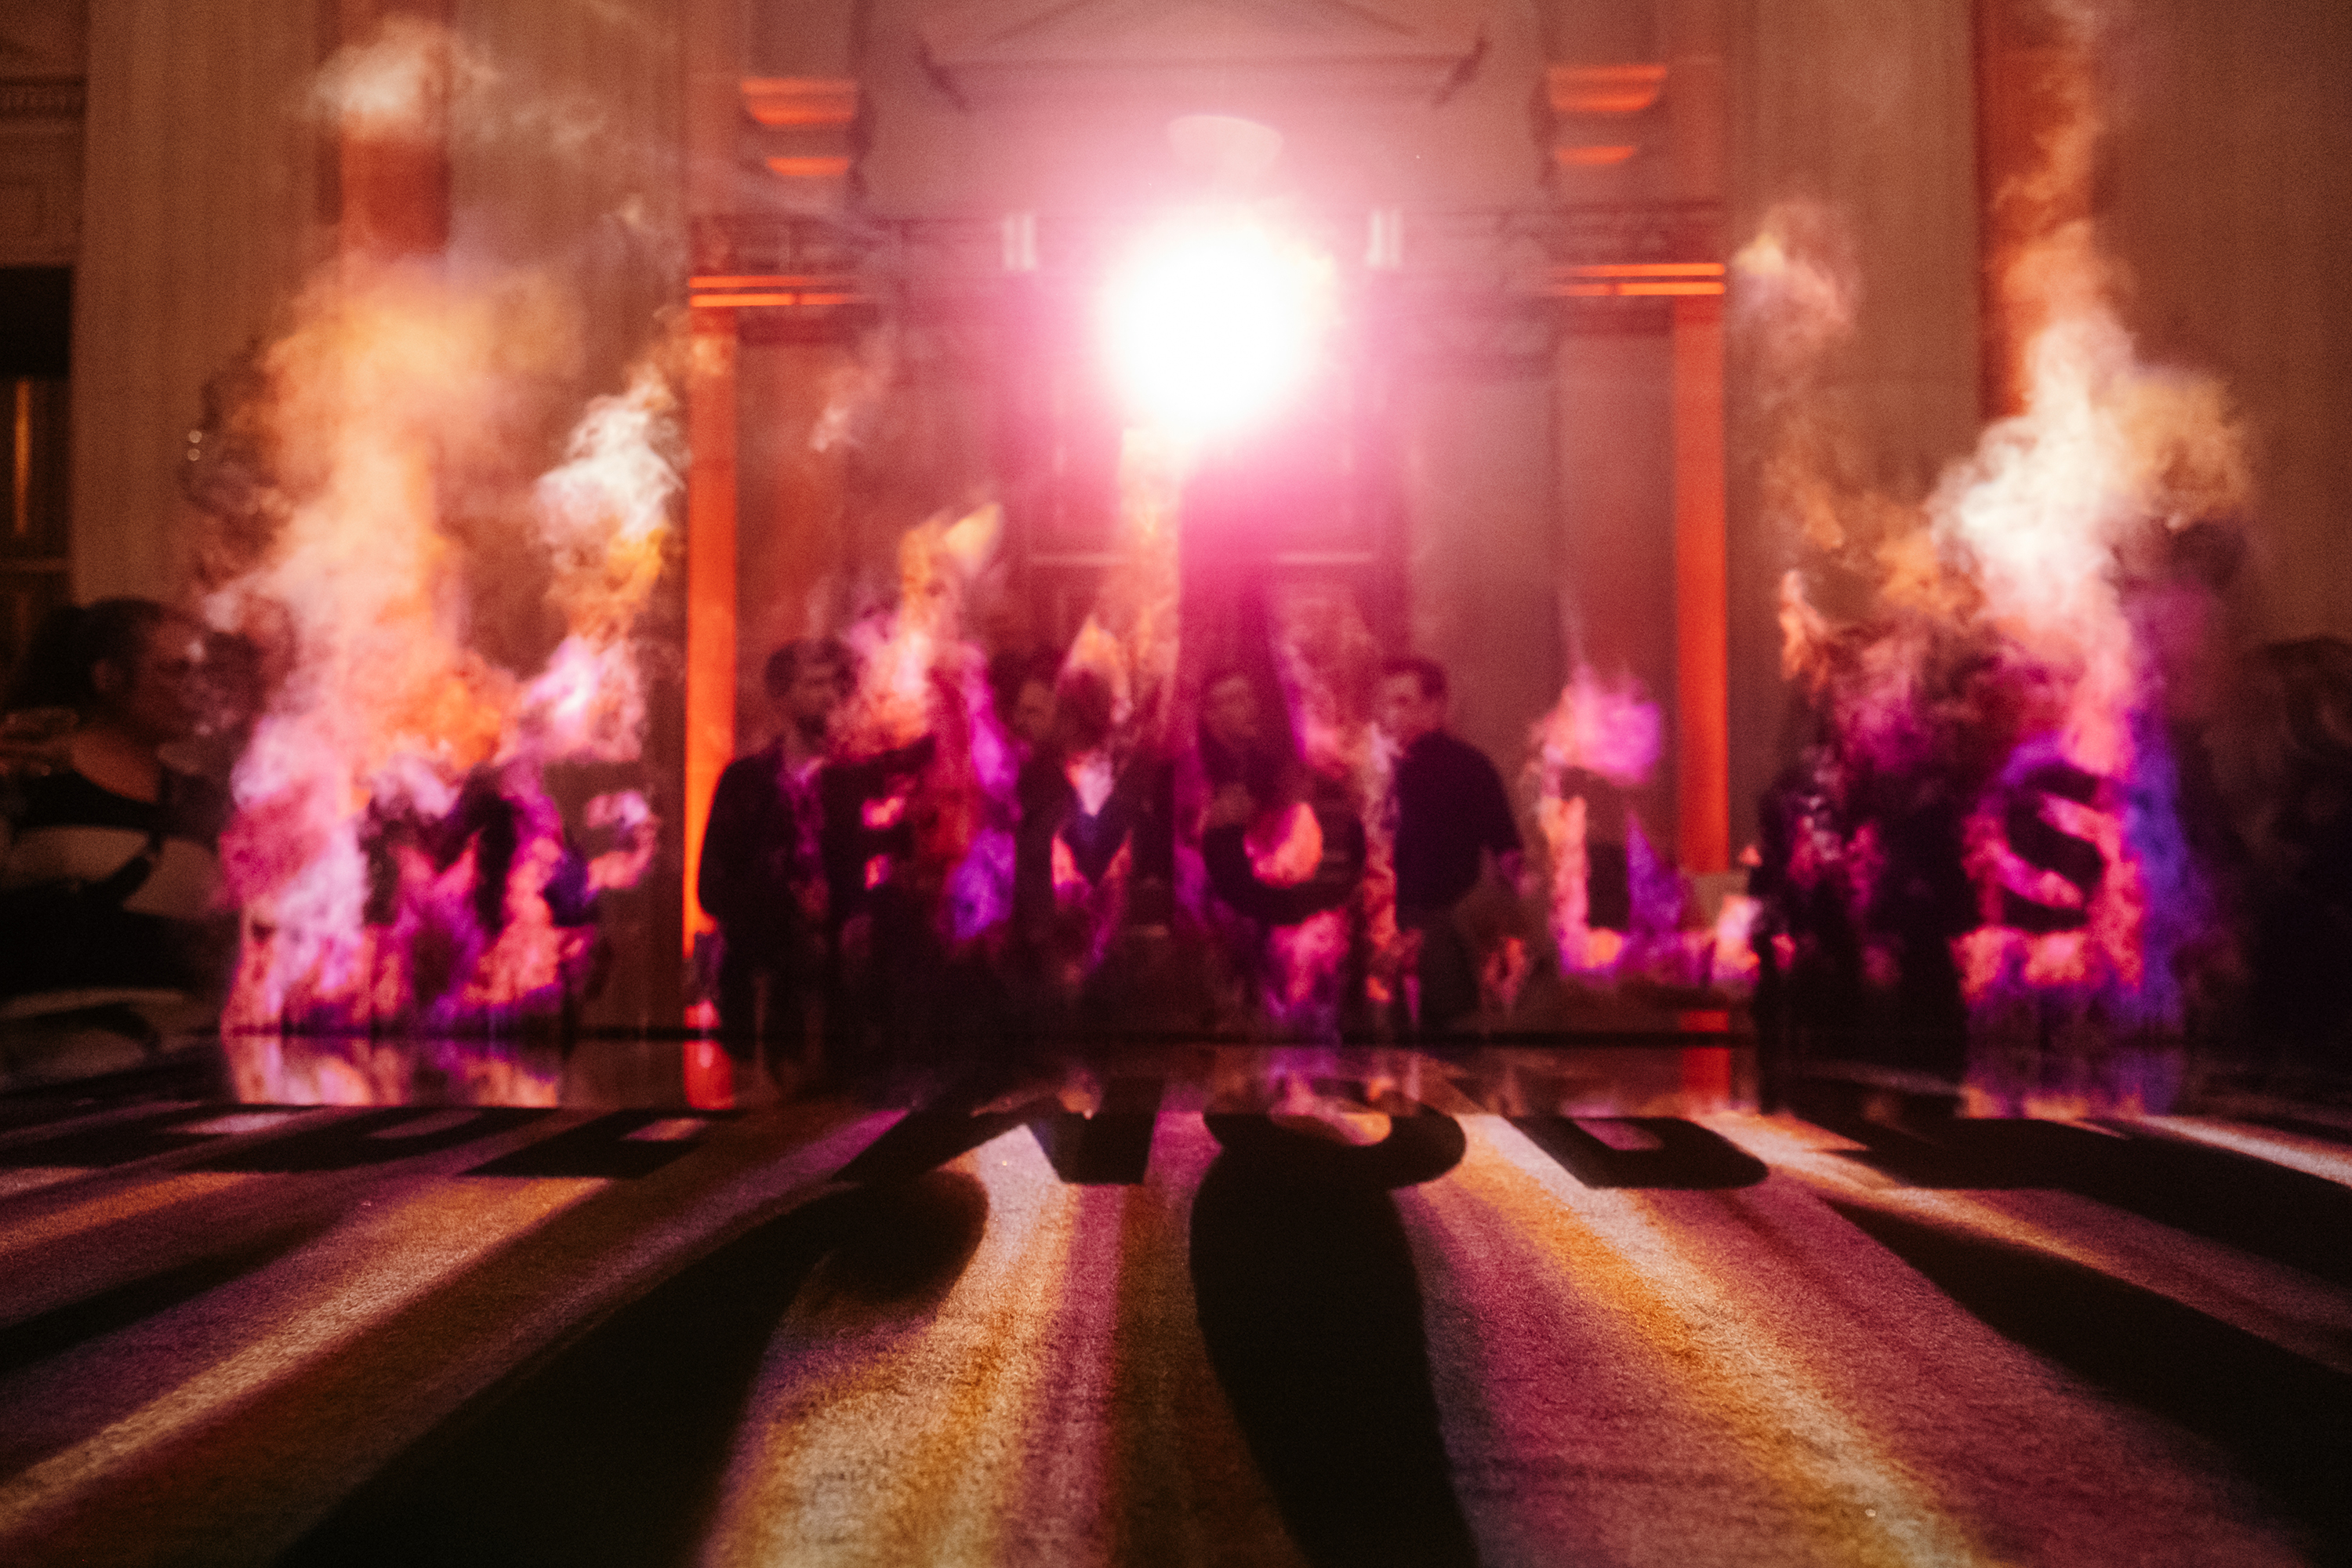 A group of people behind colorful smoke plumes with a bright light source behind them, casting long shadows.